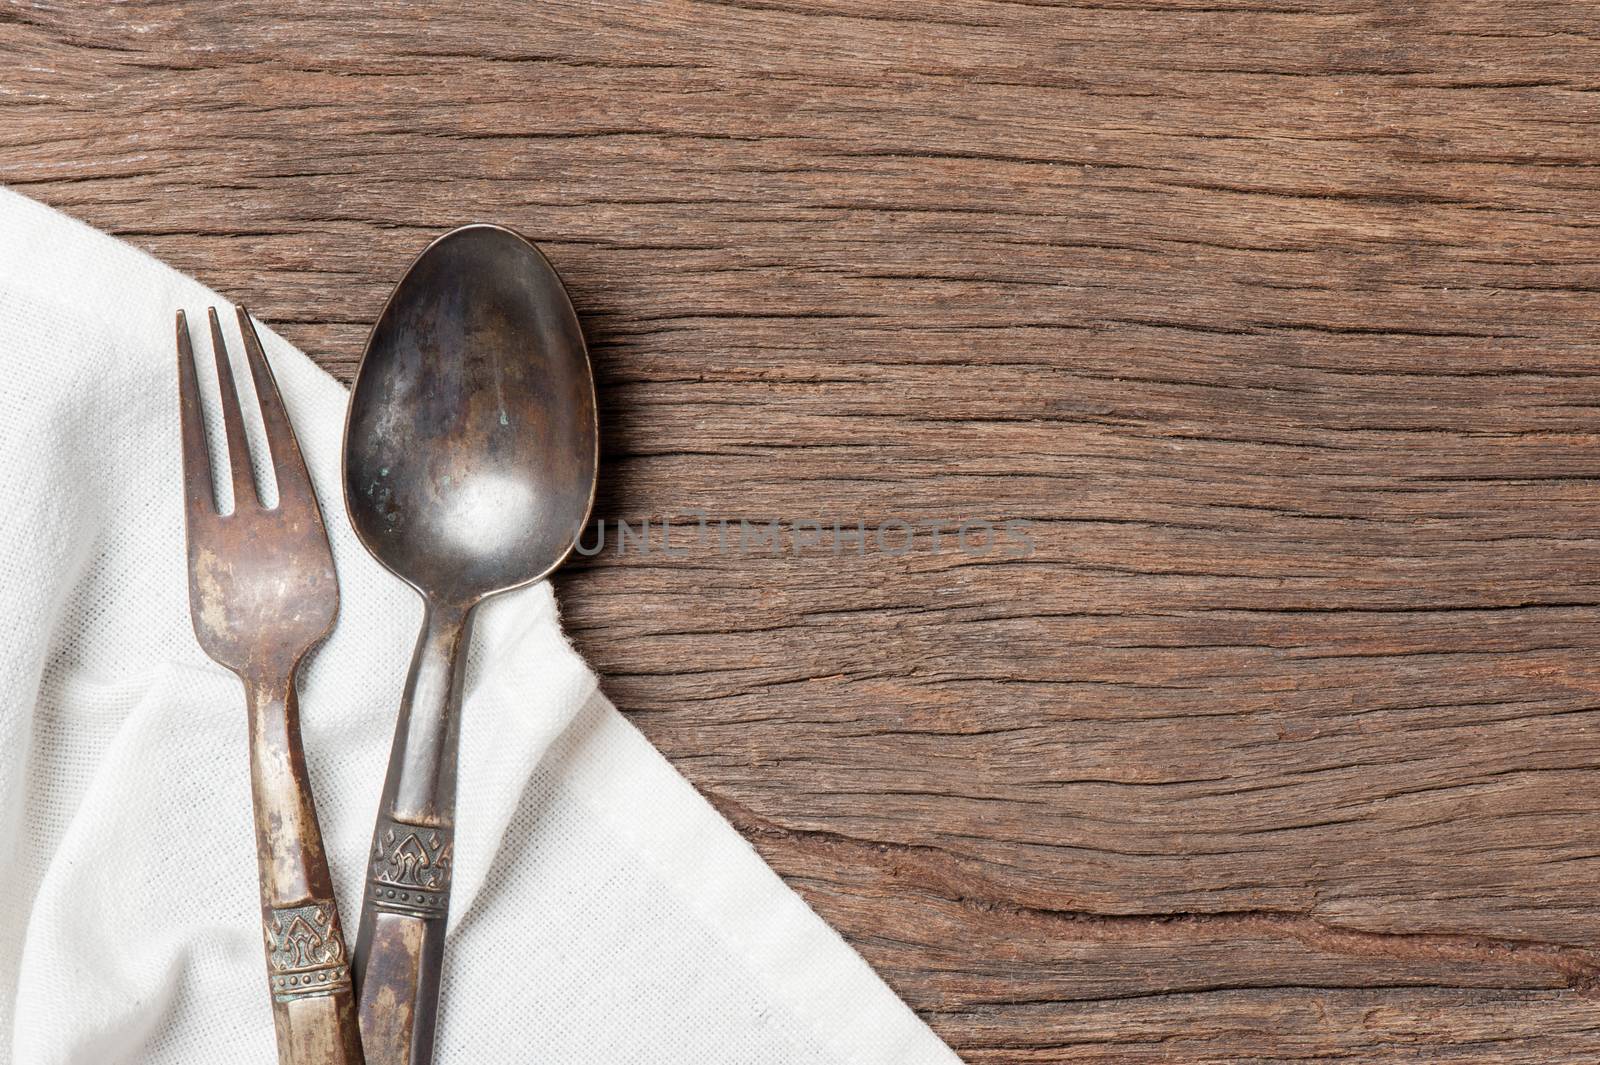 spoon and fork by norgal